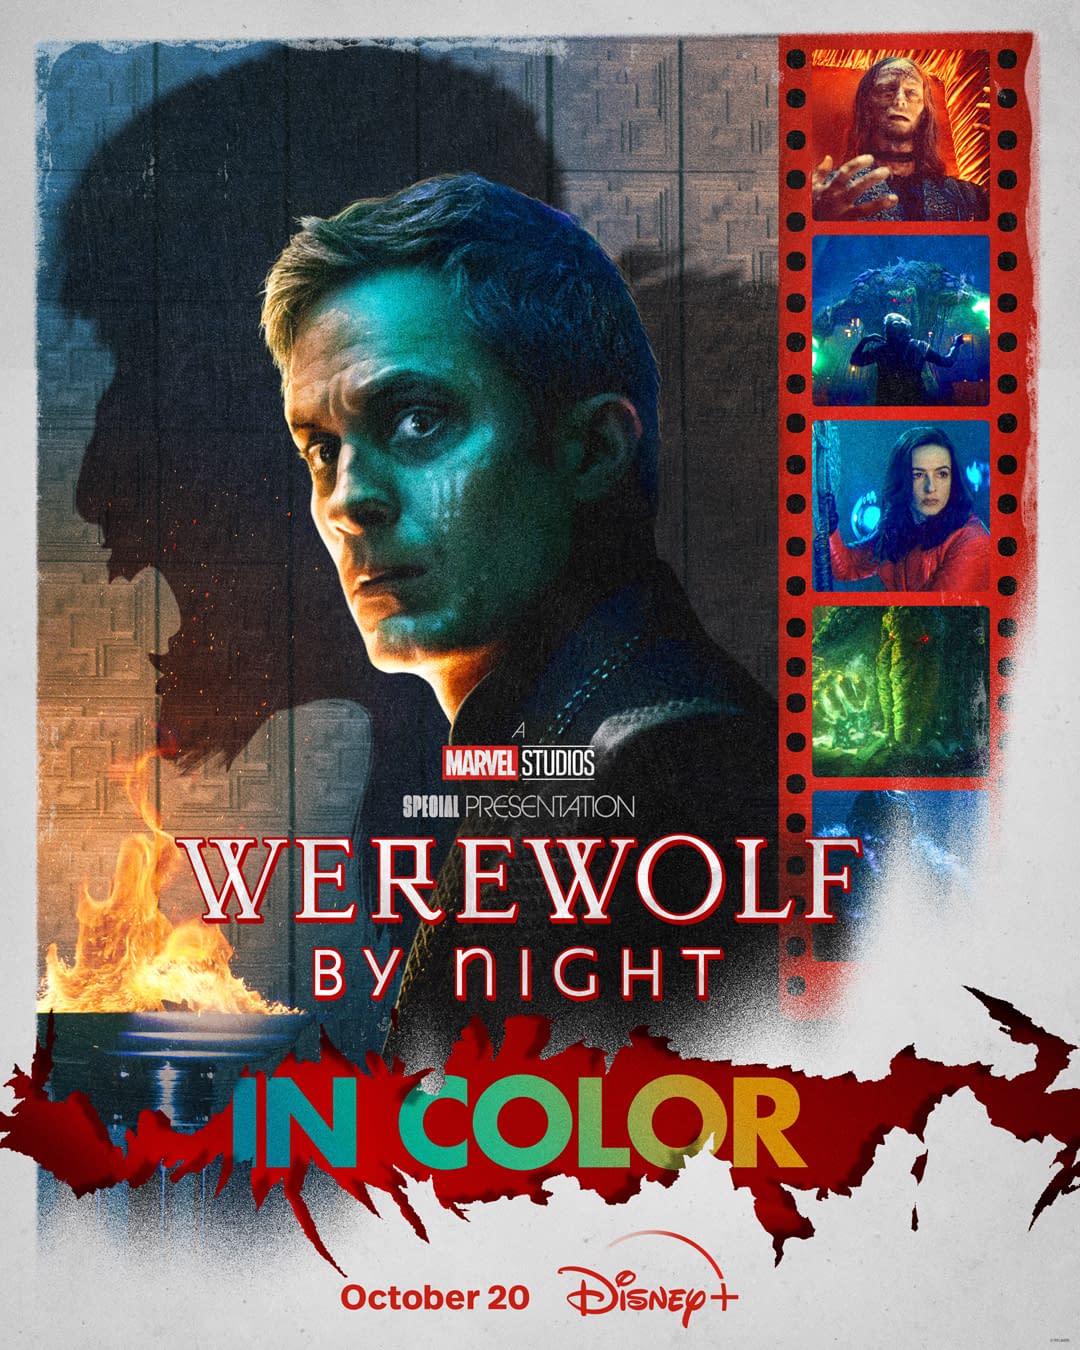 Werewolf by Night in Color Official Trailer, Key Art Poster Released